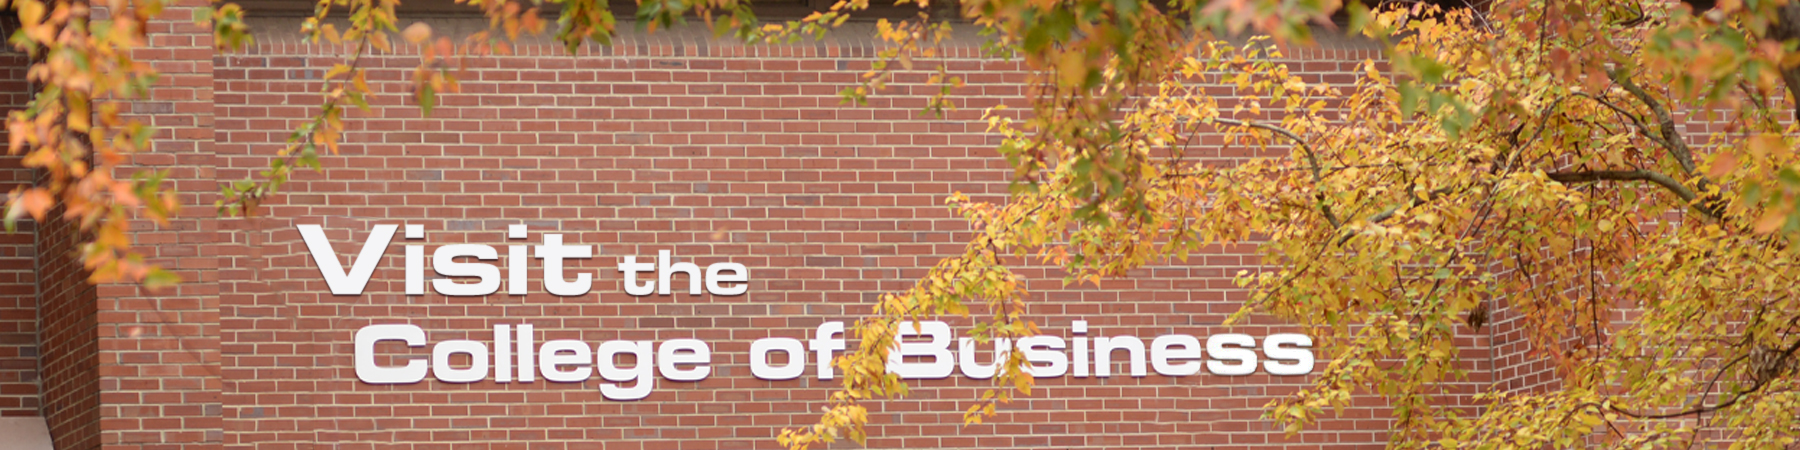 Visit the College of Business